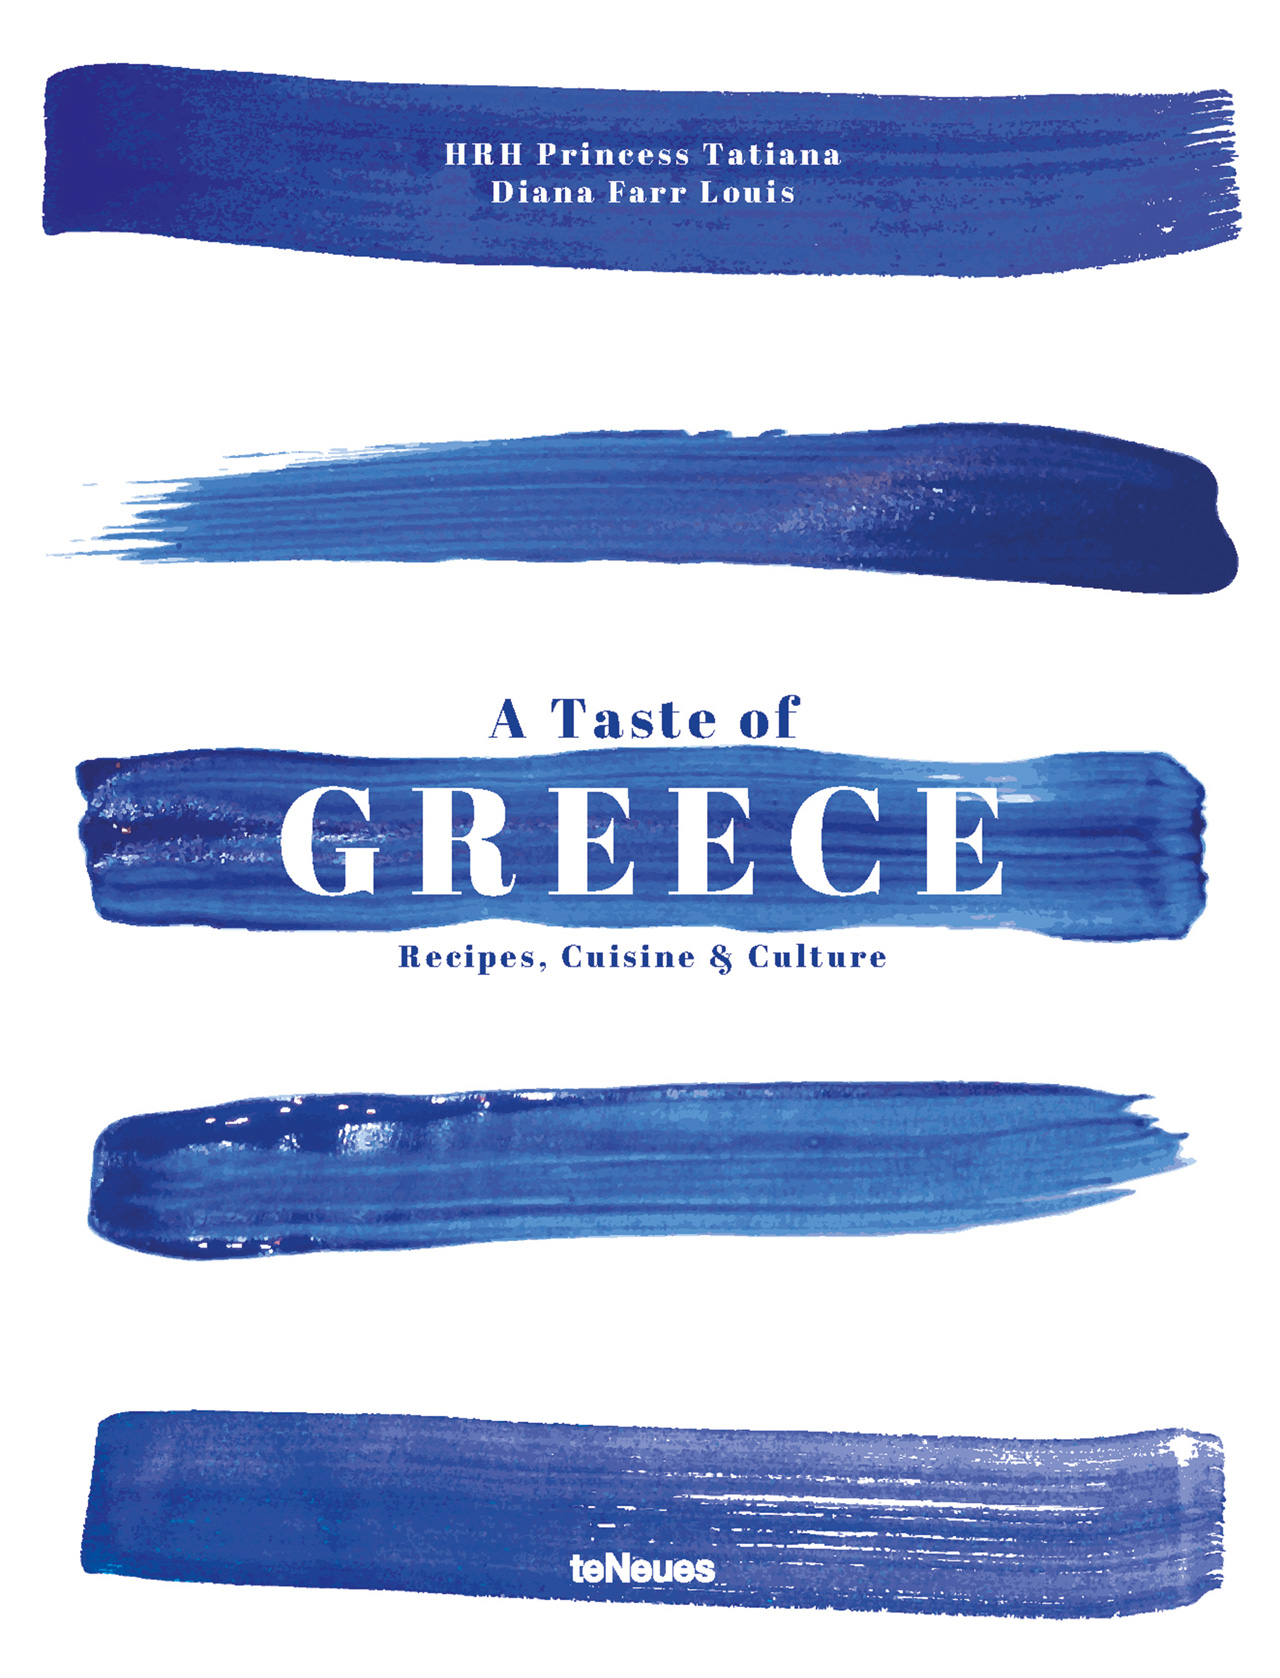 A Taste of Greece - Recipes, Cuisine &amp; Culture by HRH Princess Tatiana &amp; Diana Farr Louis, published by teNeues.